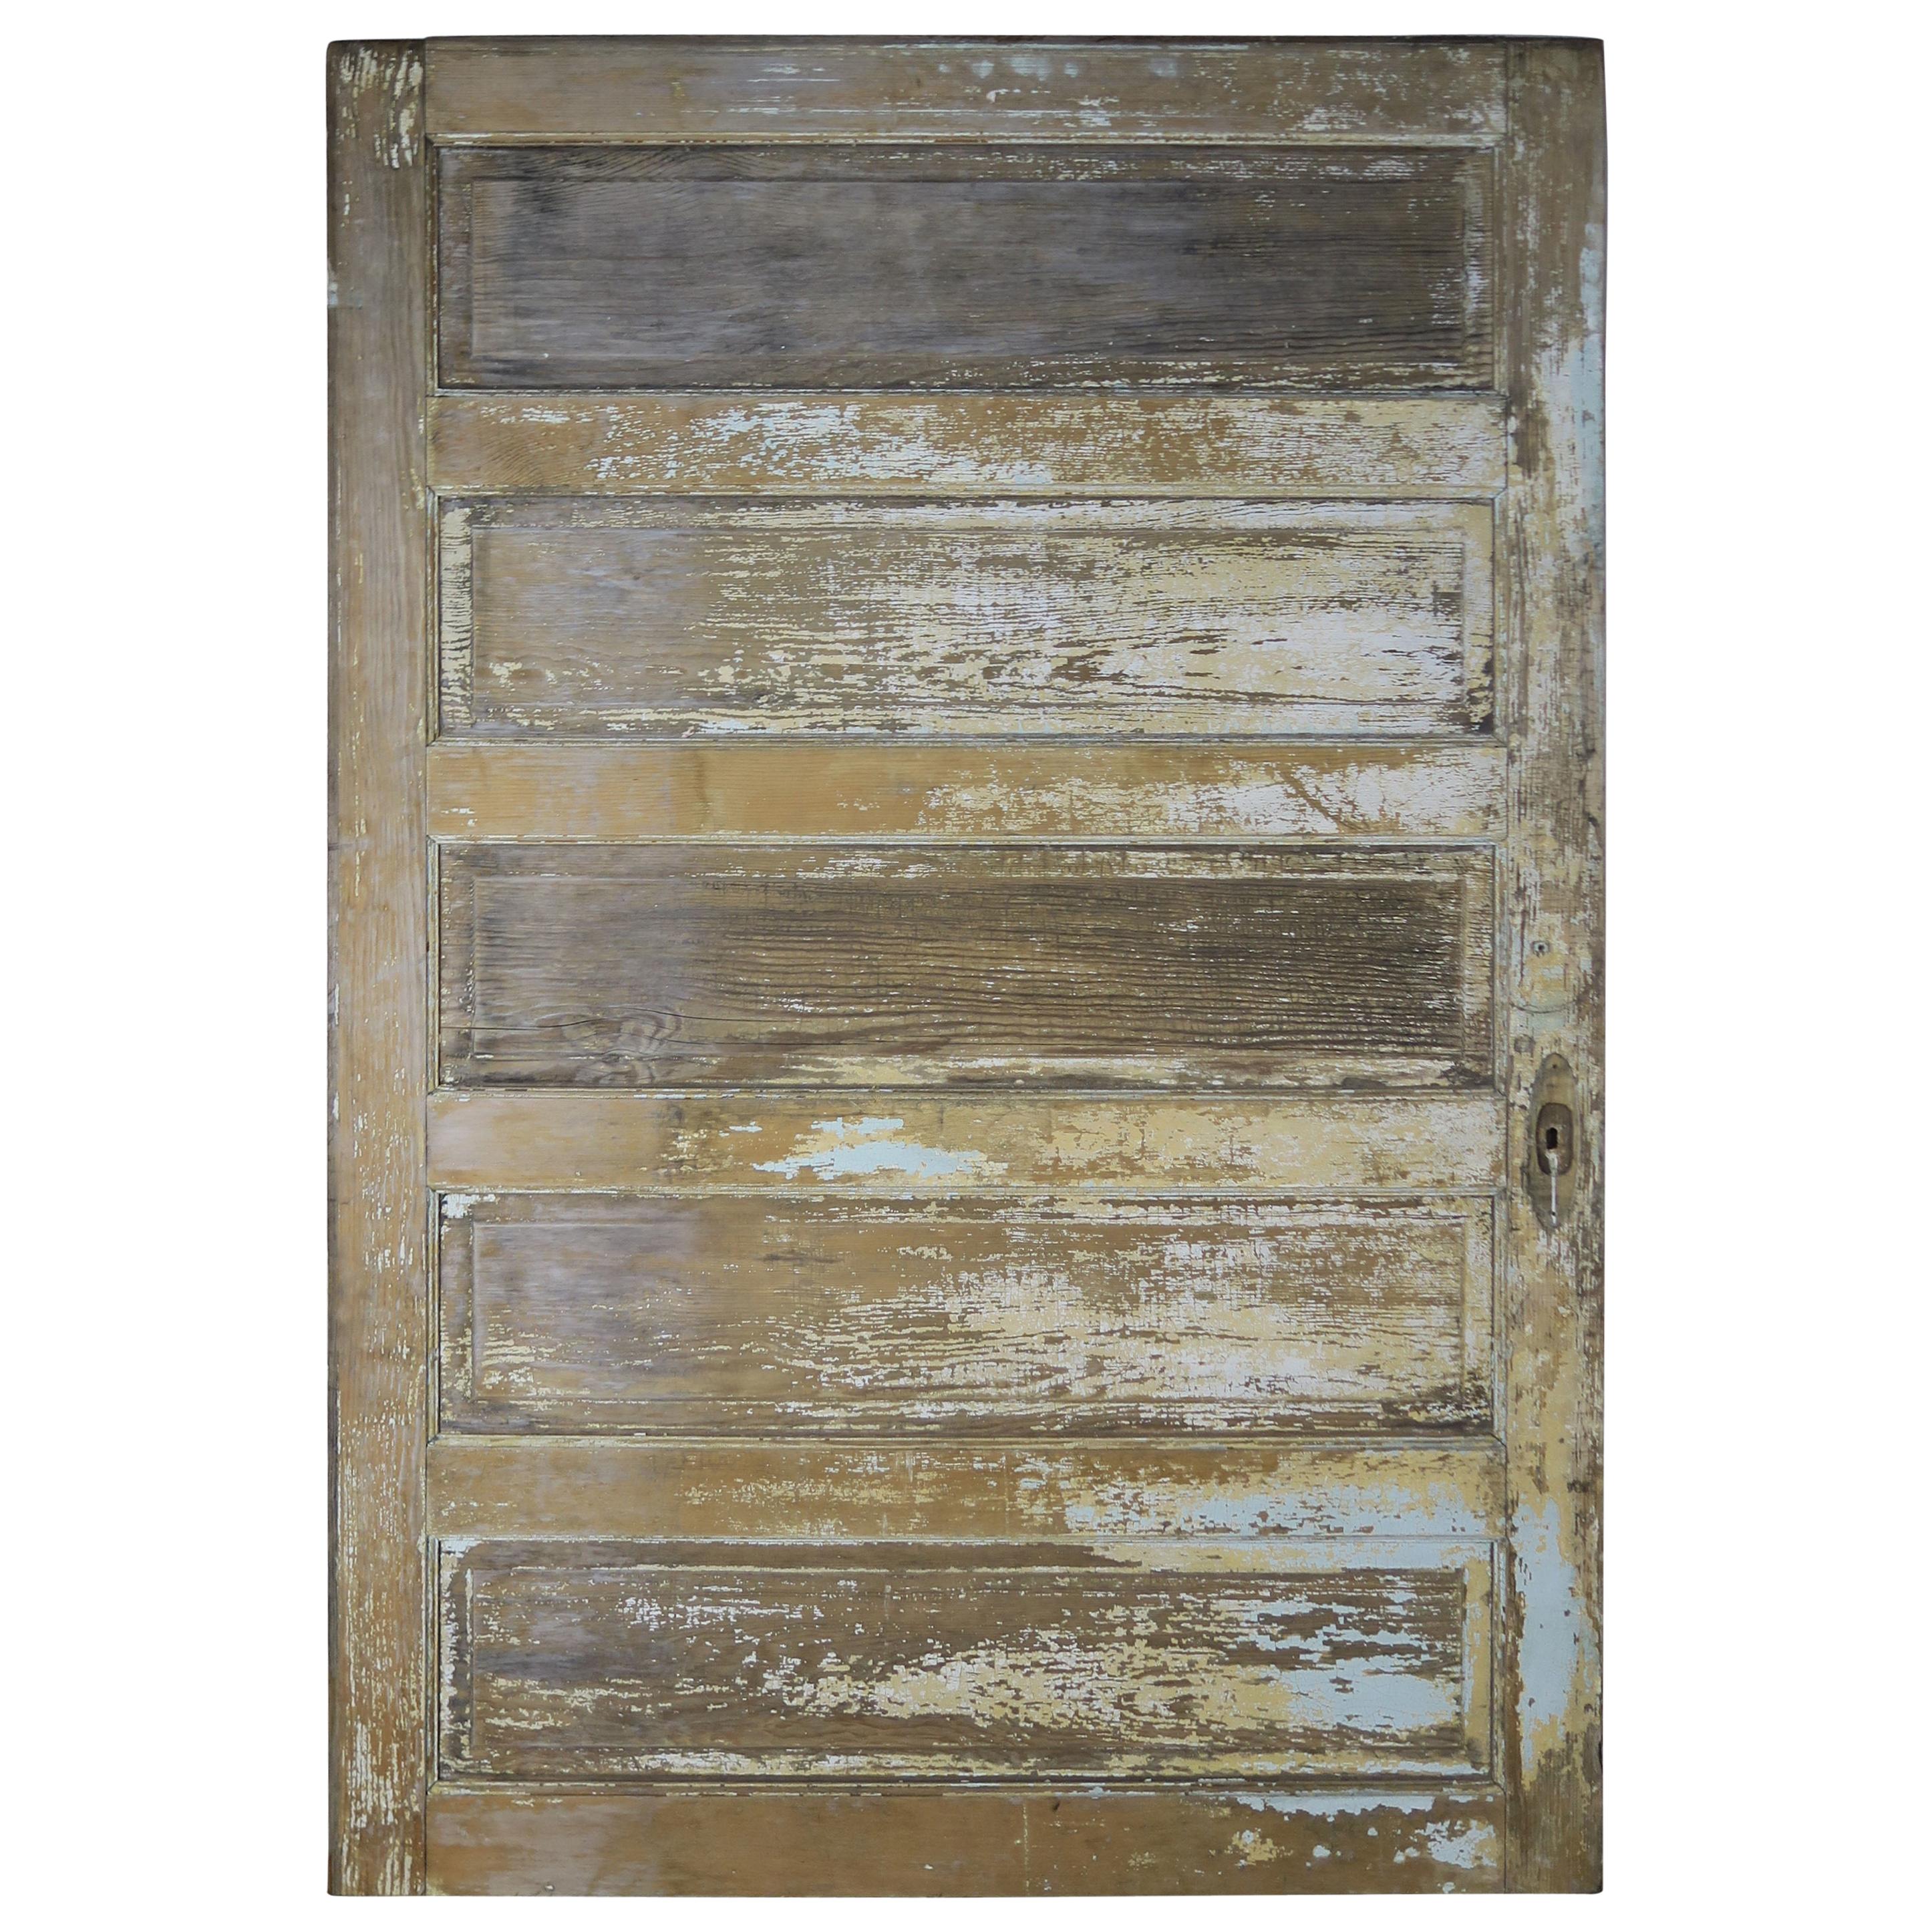 19th Century French Painted Barn Door